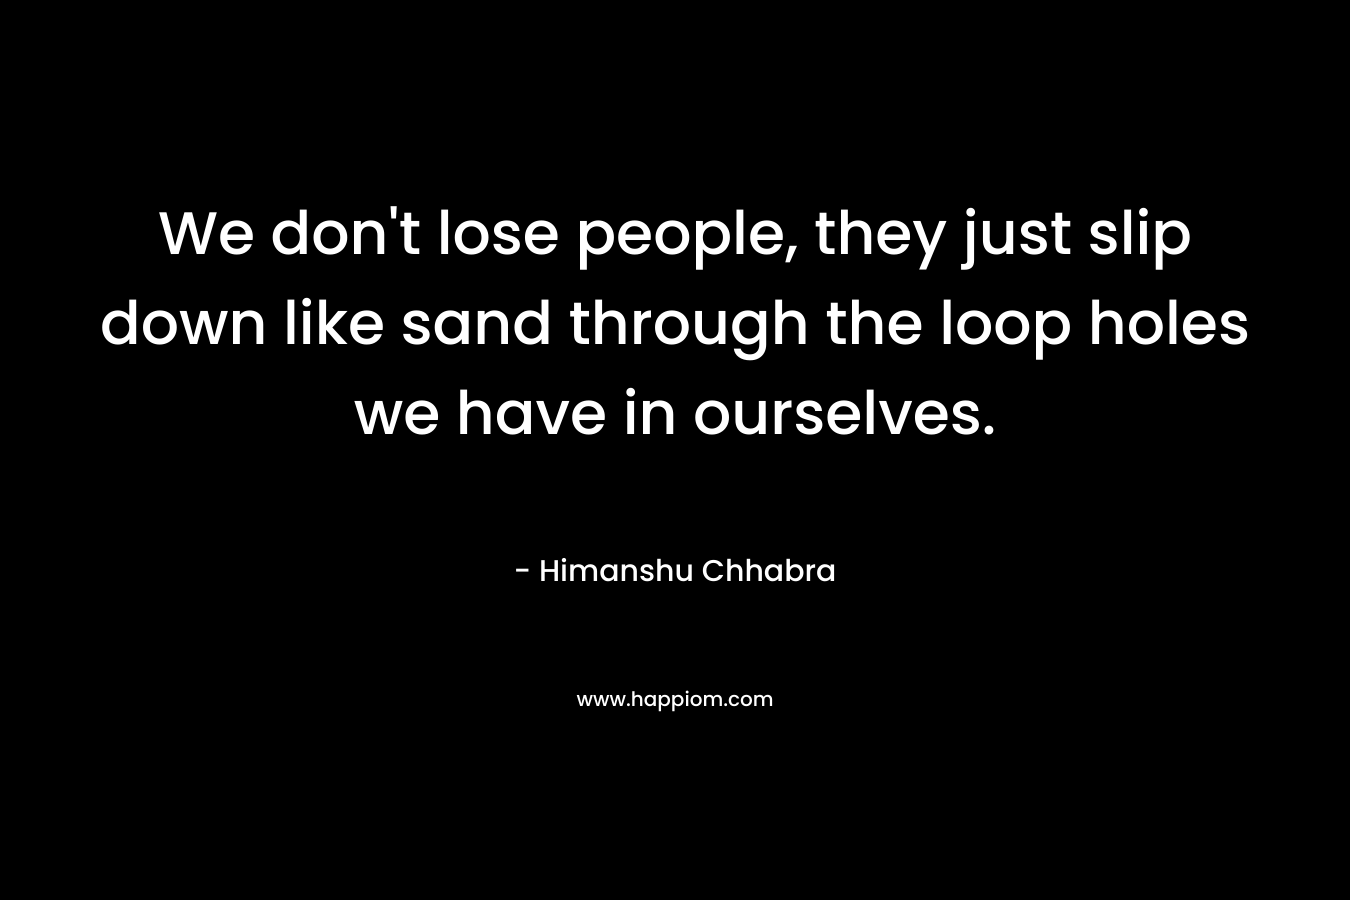 We don’t lose people, they just slip down like sand through the loop holes we have in ourselves. – Himanshu Chhabra